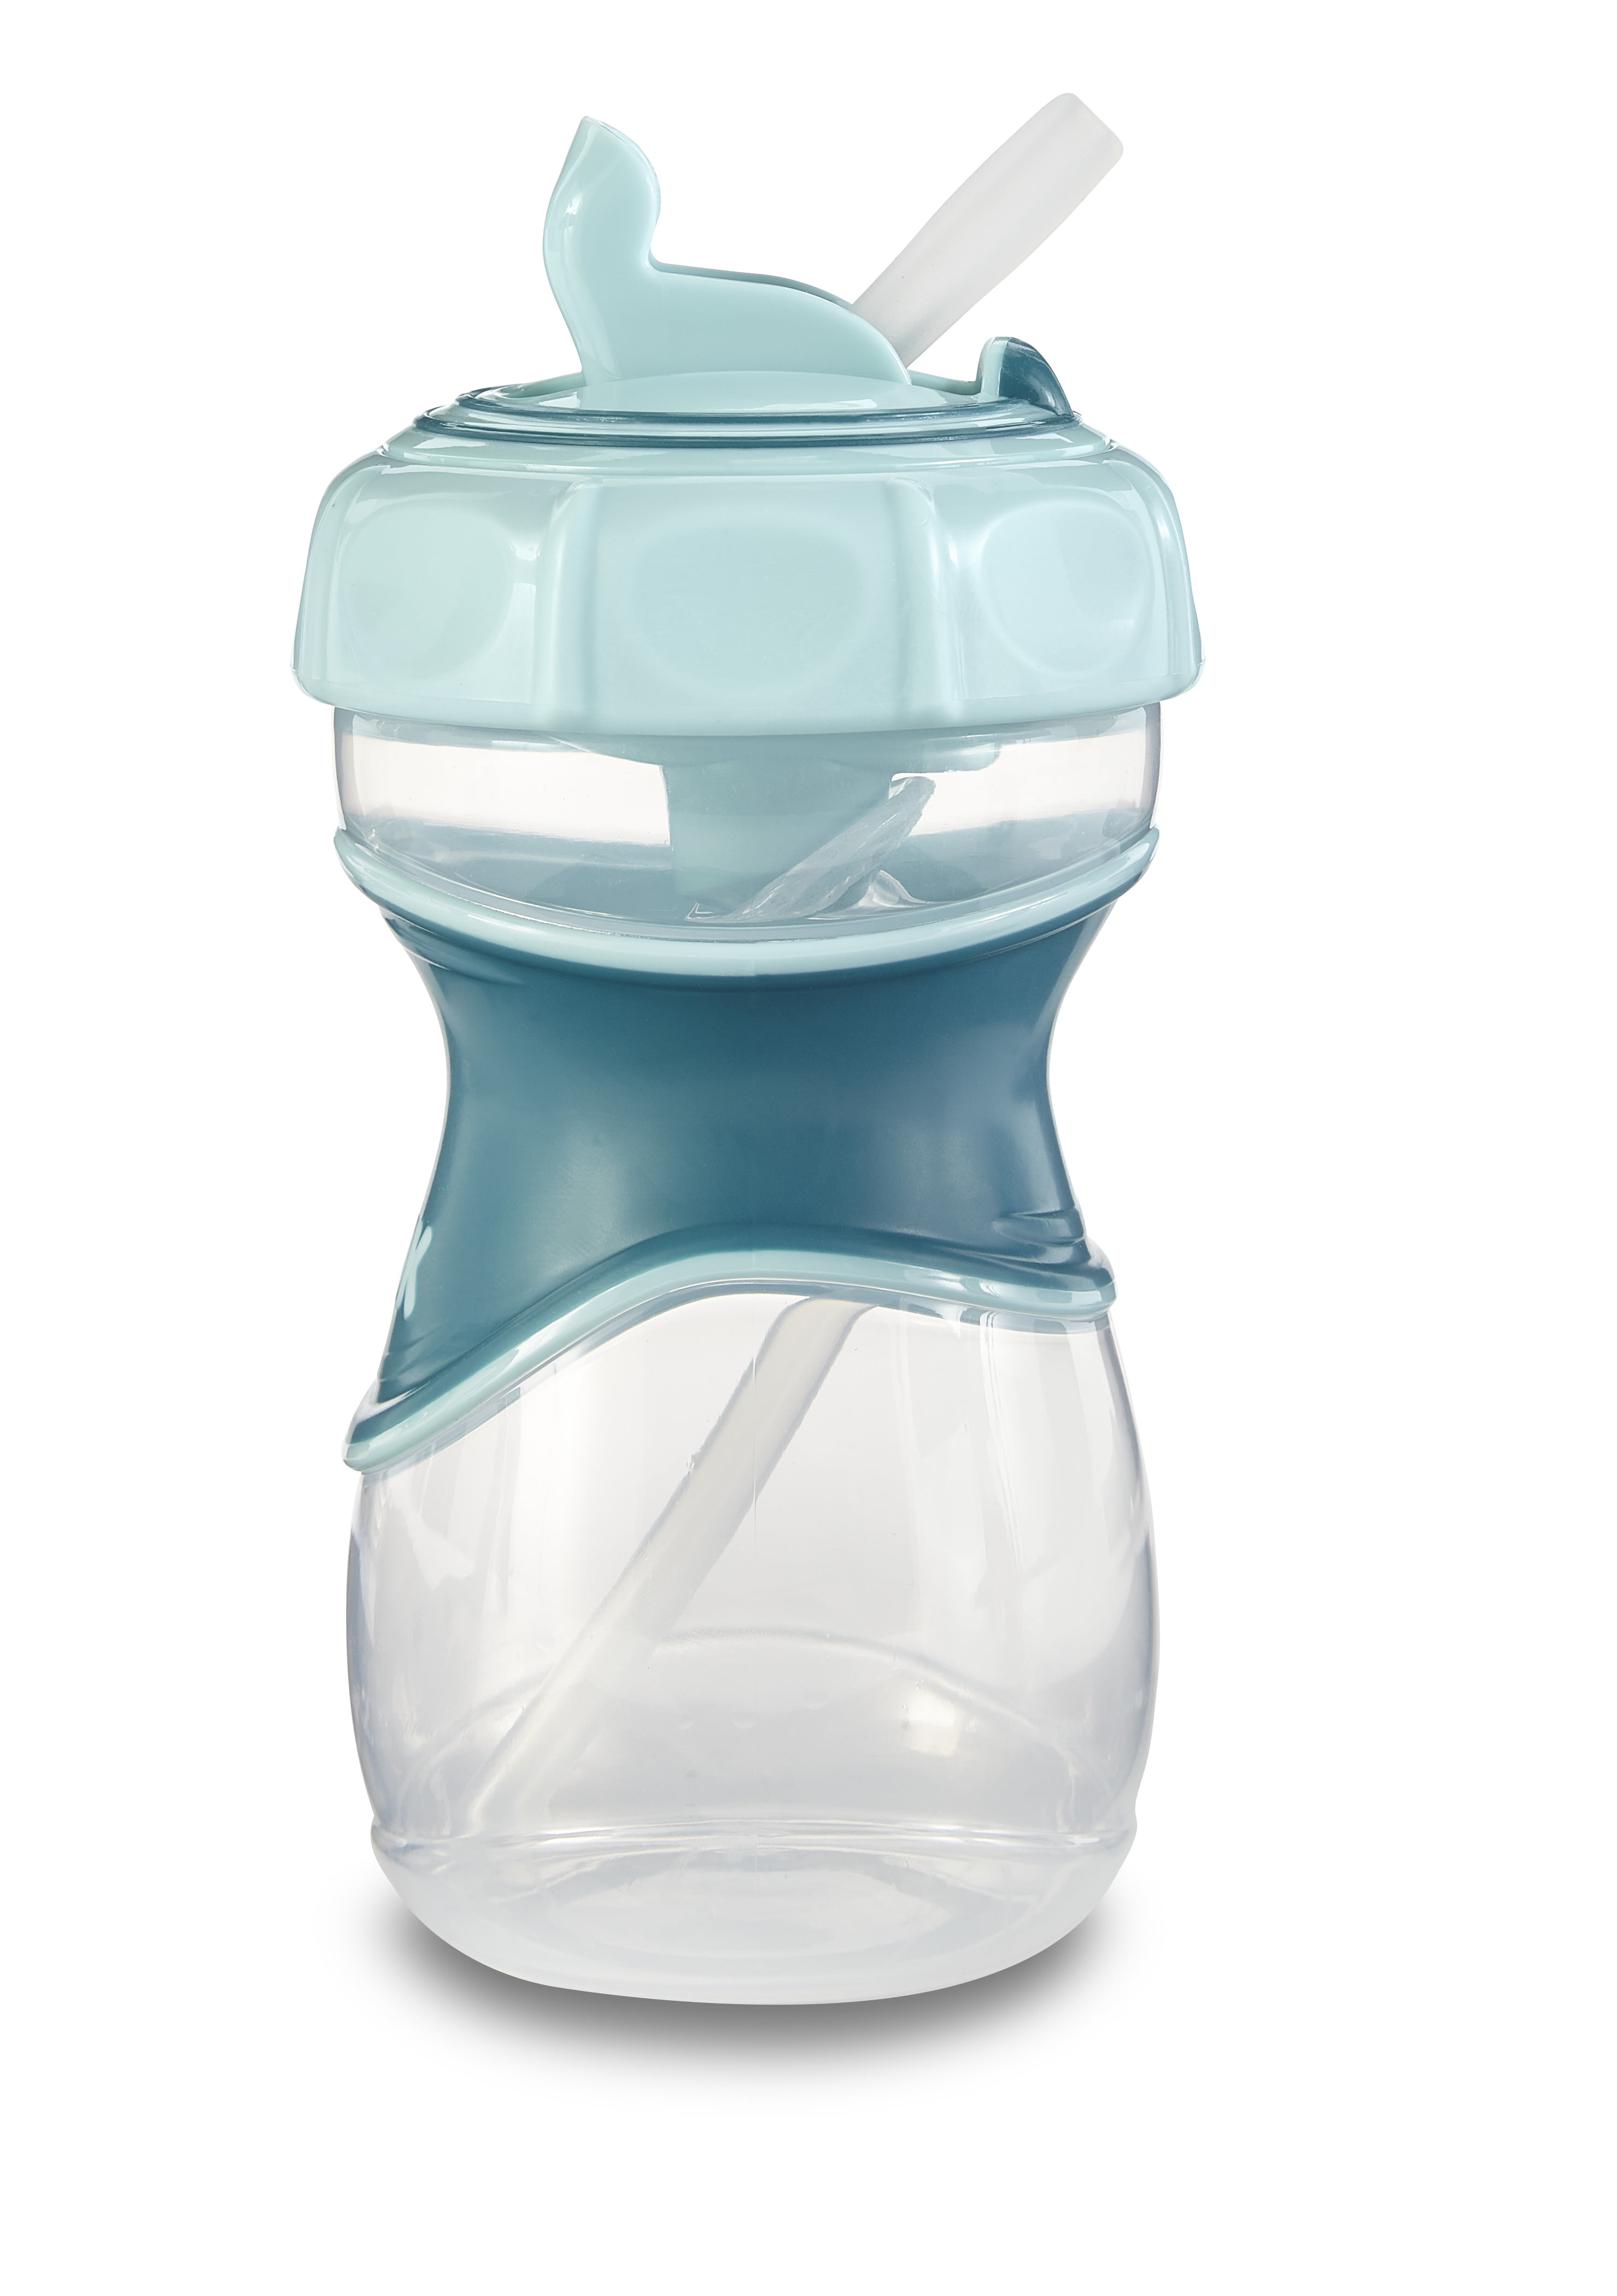 NUK, Everlast Weighted Straw Cup, 12+ Months, Teal, 10 oz (300 ml)